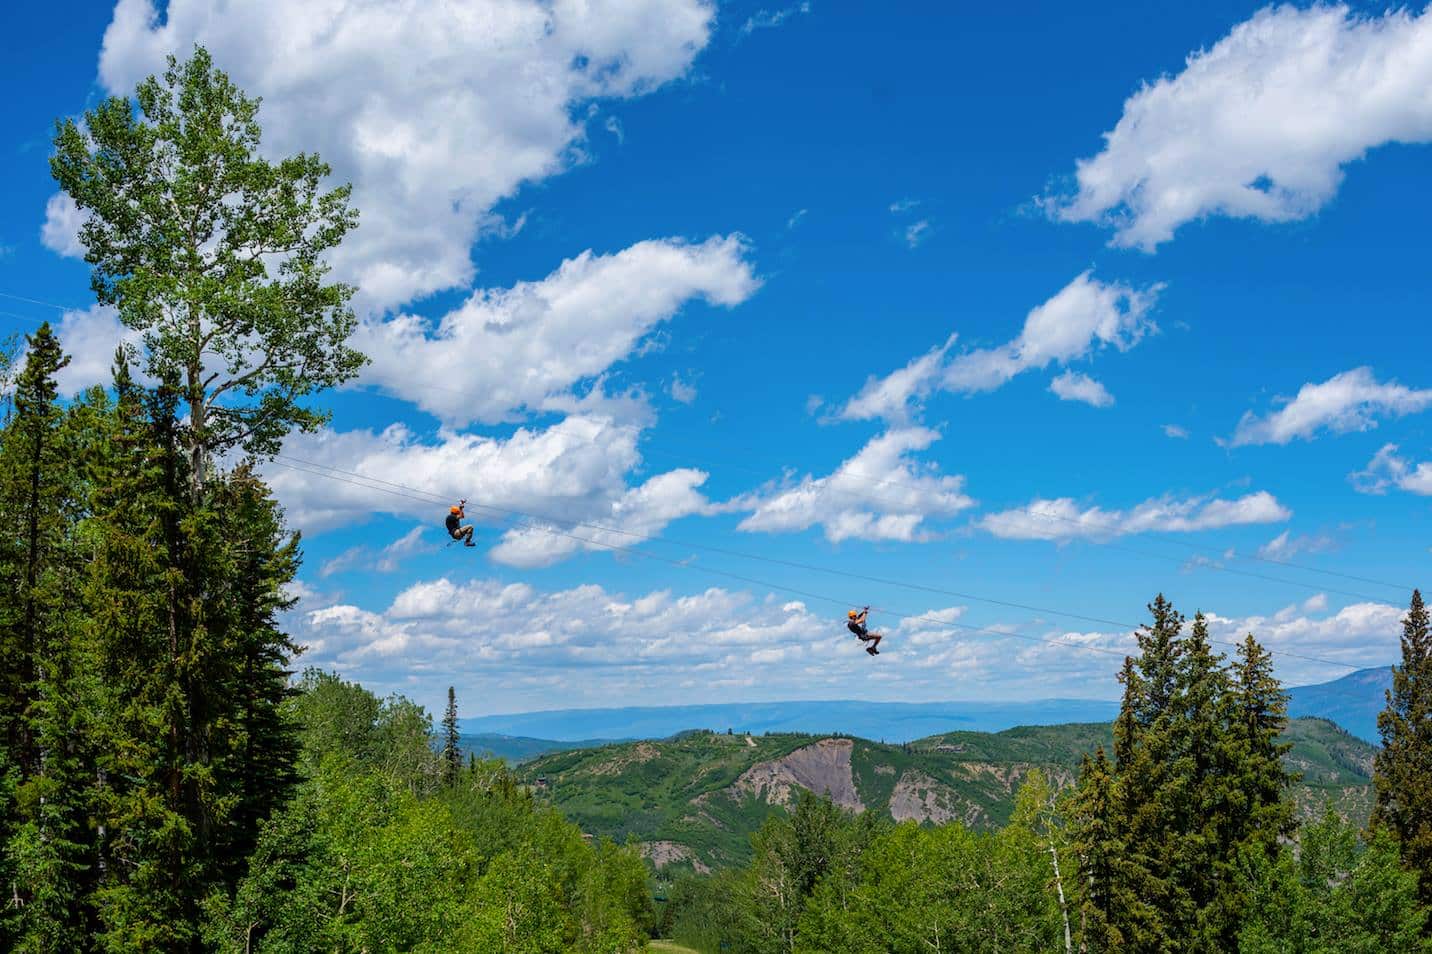 Two people ziplining high above mountain forest